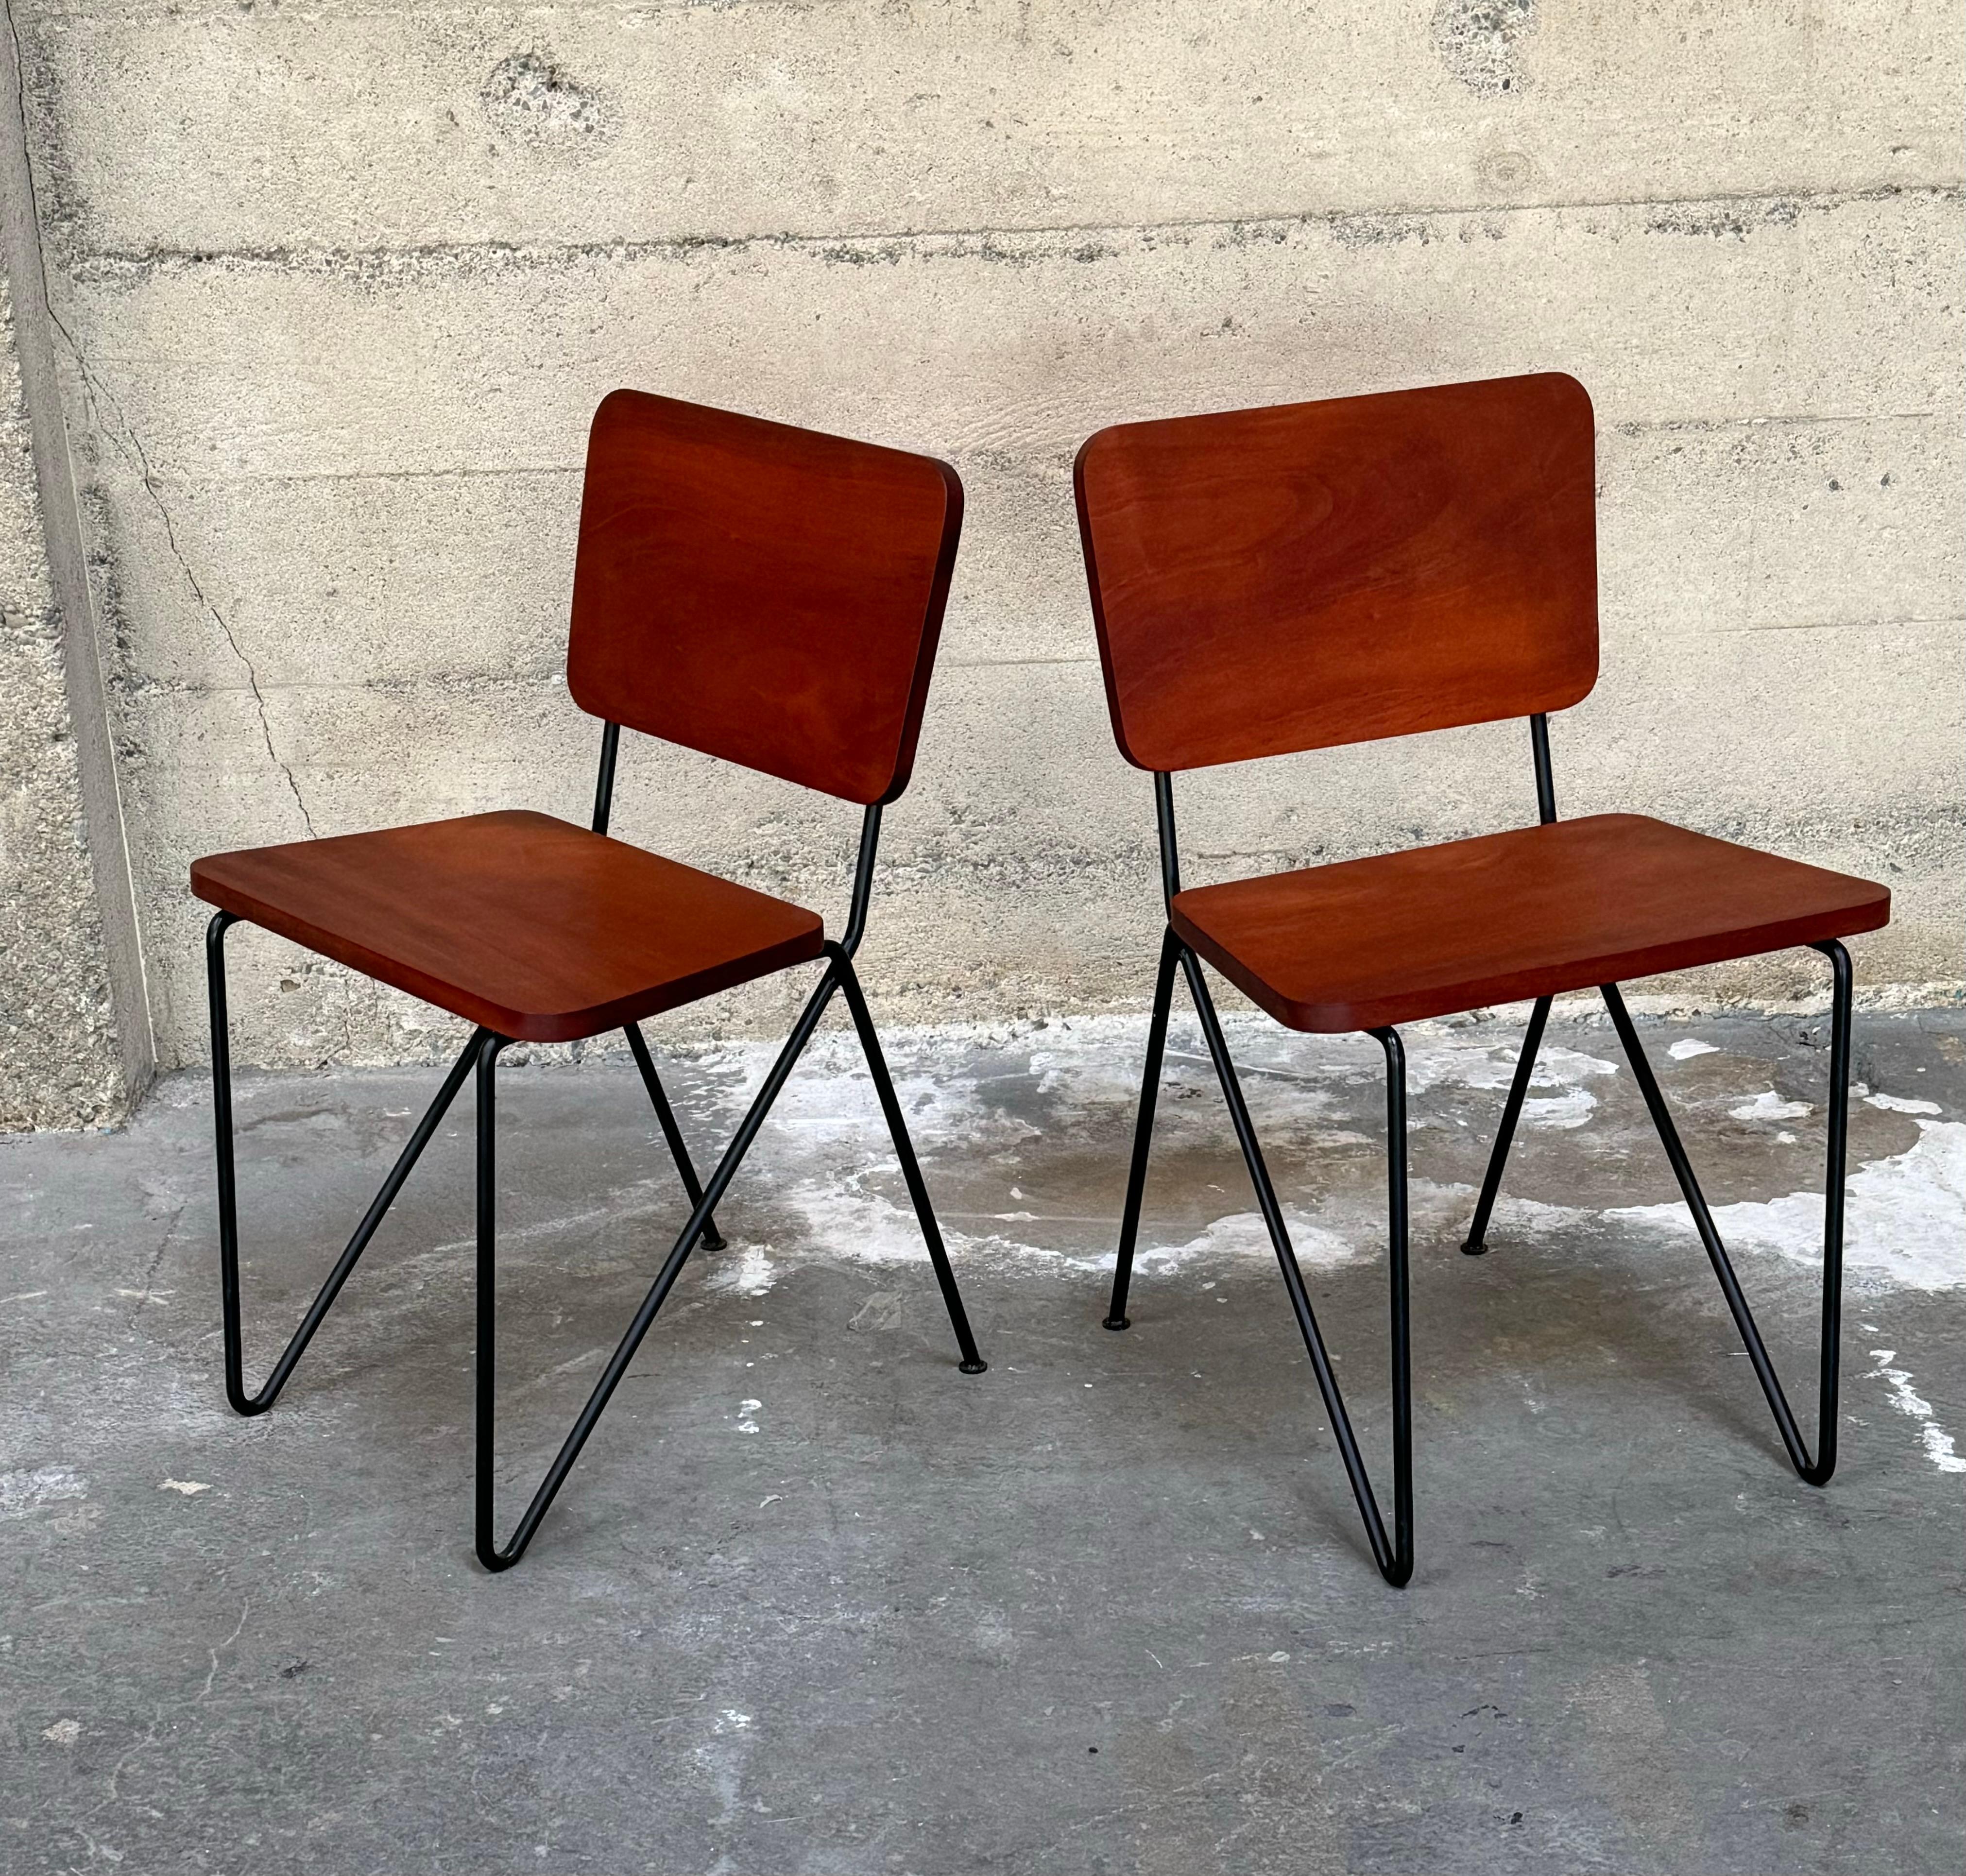 Pair of iron and tropical hardwood side chairs, hairpin wrought iron frames with wooden seats and backs in a rounded tapered triangle form. The wood is a rich red-brown with a slight black grain. The welded iron frames have a hairpin front wrapping